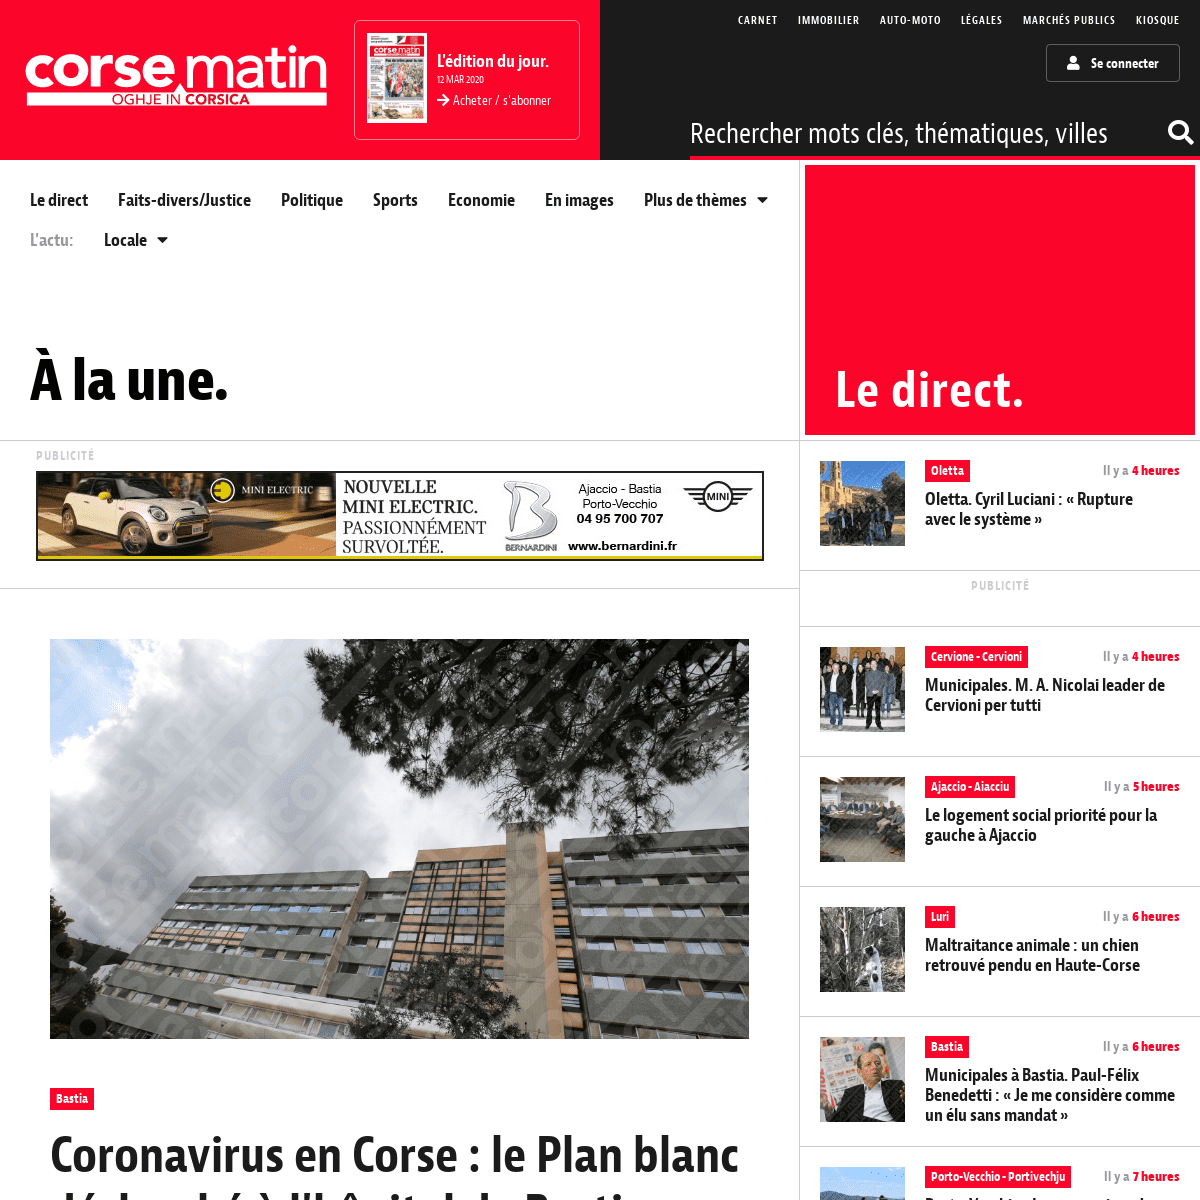 A complete backup of corsematin.com